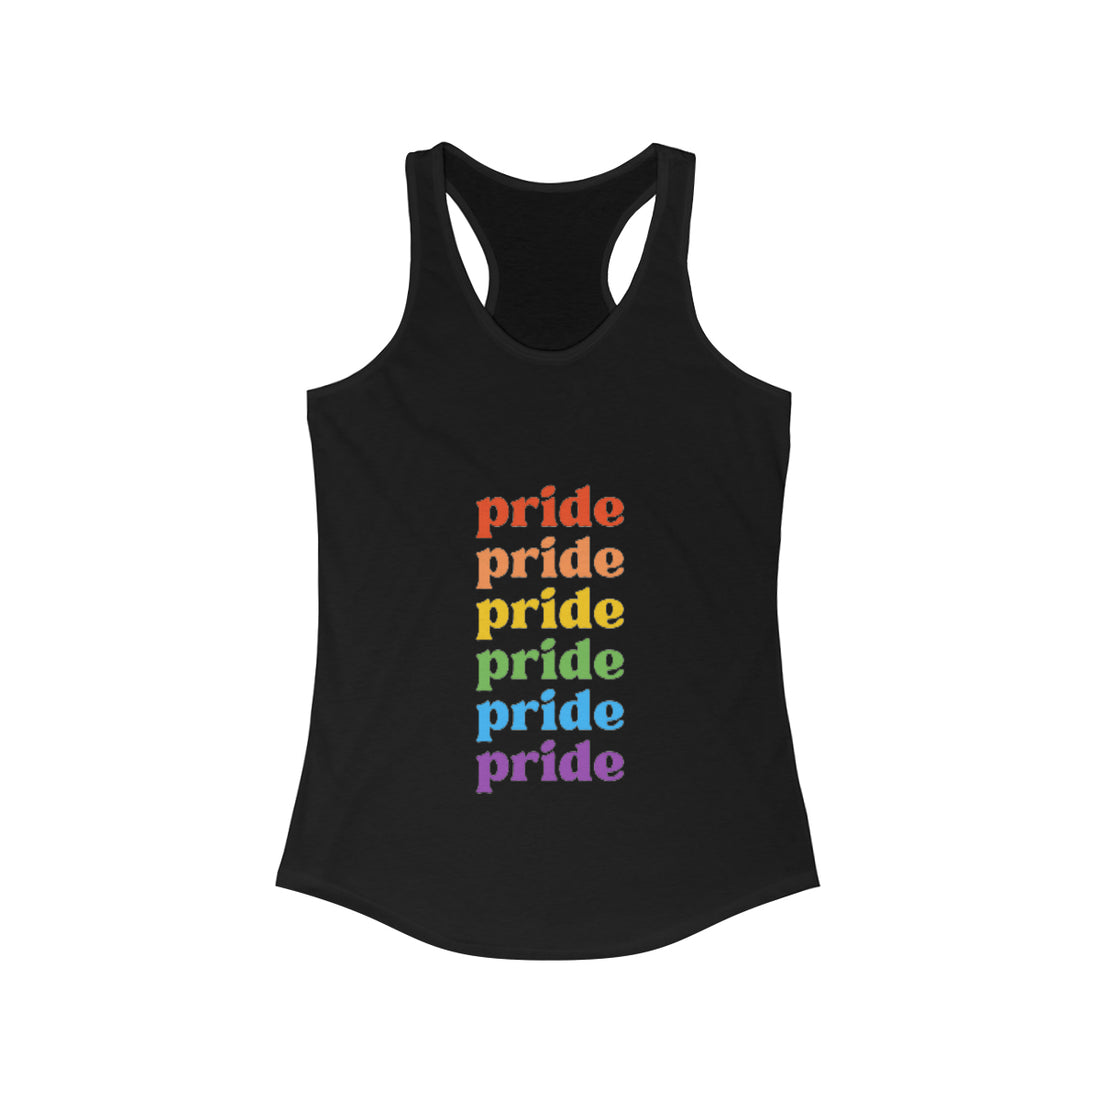 Celebrate Pride Month with Our Stylish New Tank Top!